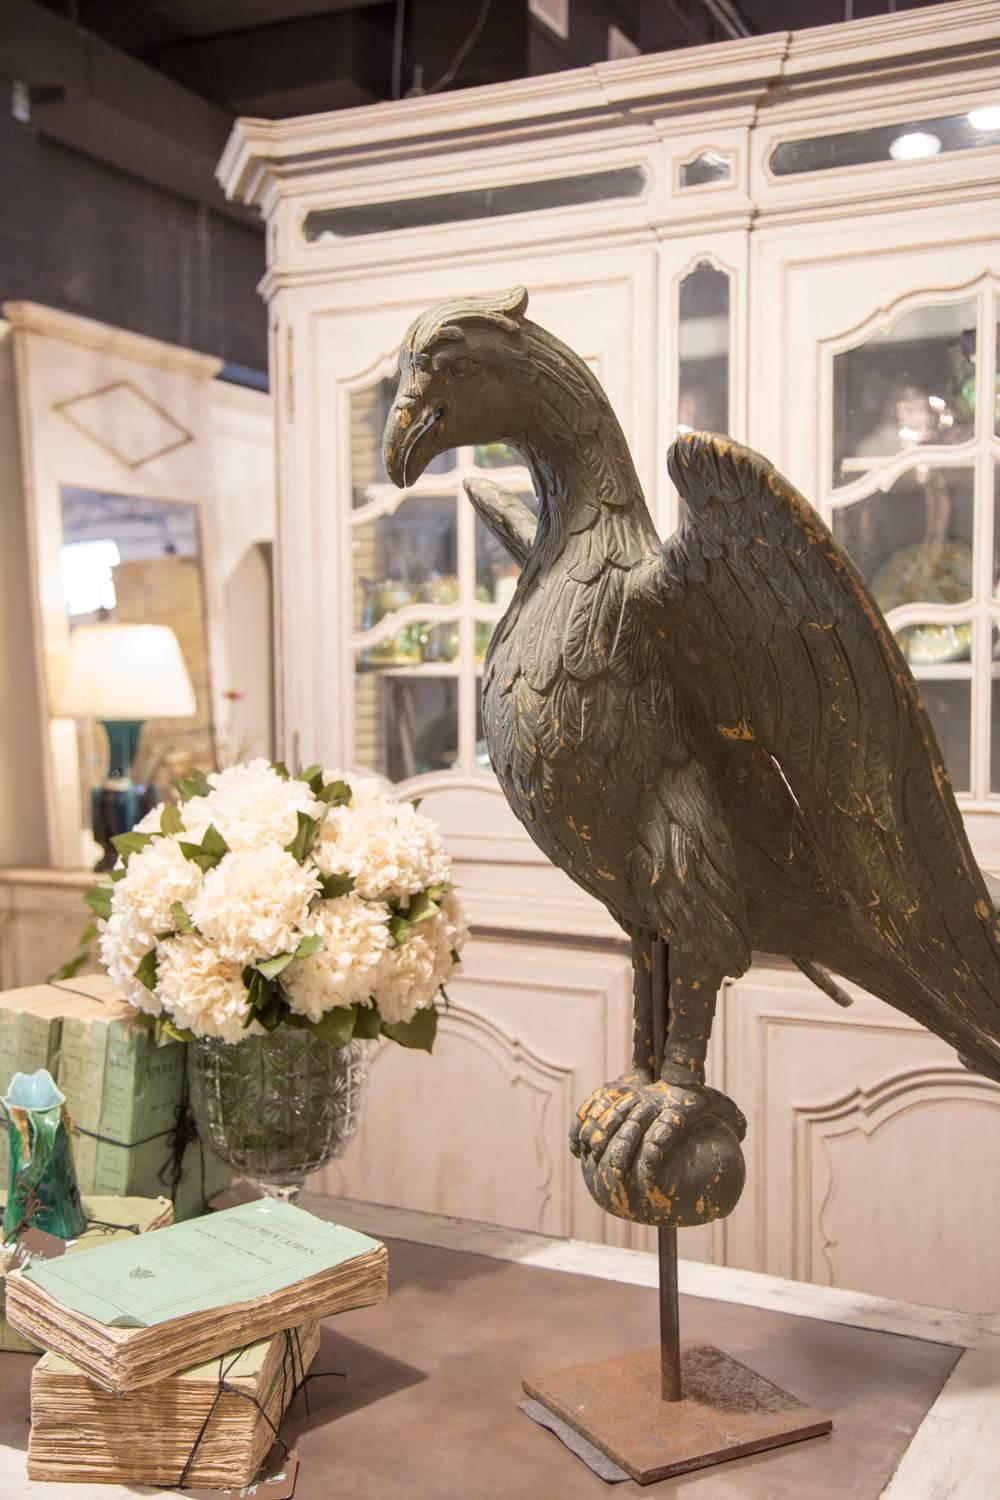 This large size hand-carved eagle lectern from the early 19th century on square custom metal stand is a show stopper! His head is slightly bent down with outstretched wings, as if he's ready to soar. The careful treatment of his body and feathers